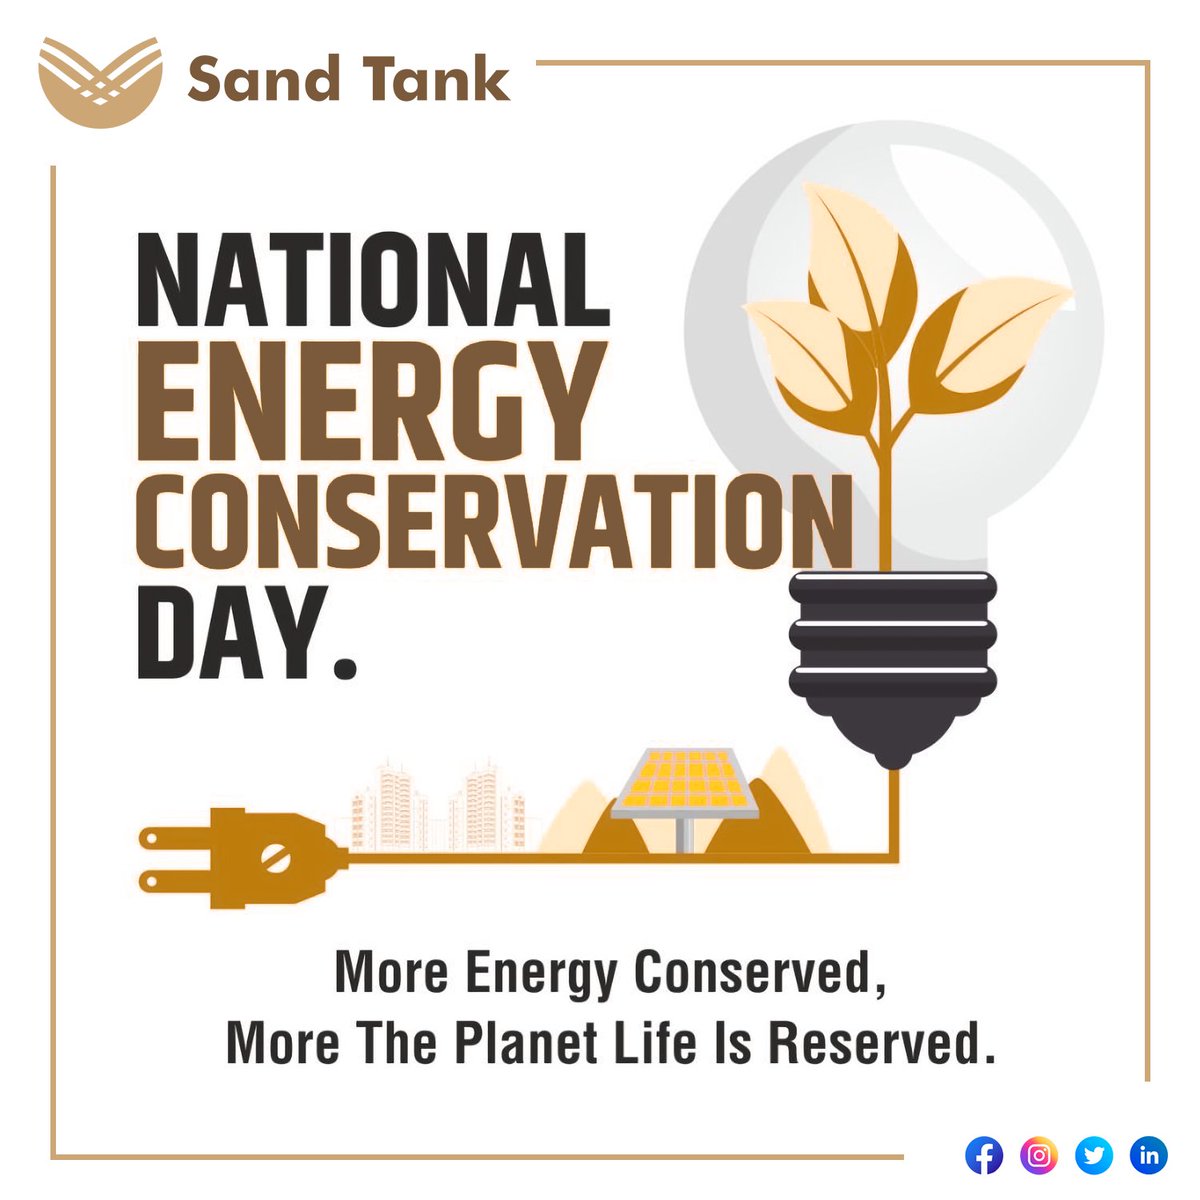 Switch off, unplug, and make a difference. Celebrate National Energy Conservation Day by taking small steps for a more sustainable future. 

#Sandtankfoundation #NationalEnergyDay #NationalEnergyConservationDay #EnergyConservationDay #ConservationNation #PowerOfSavings